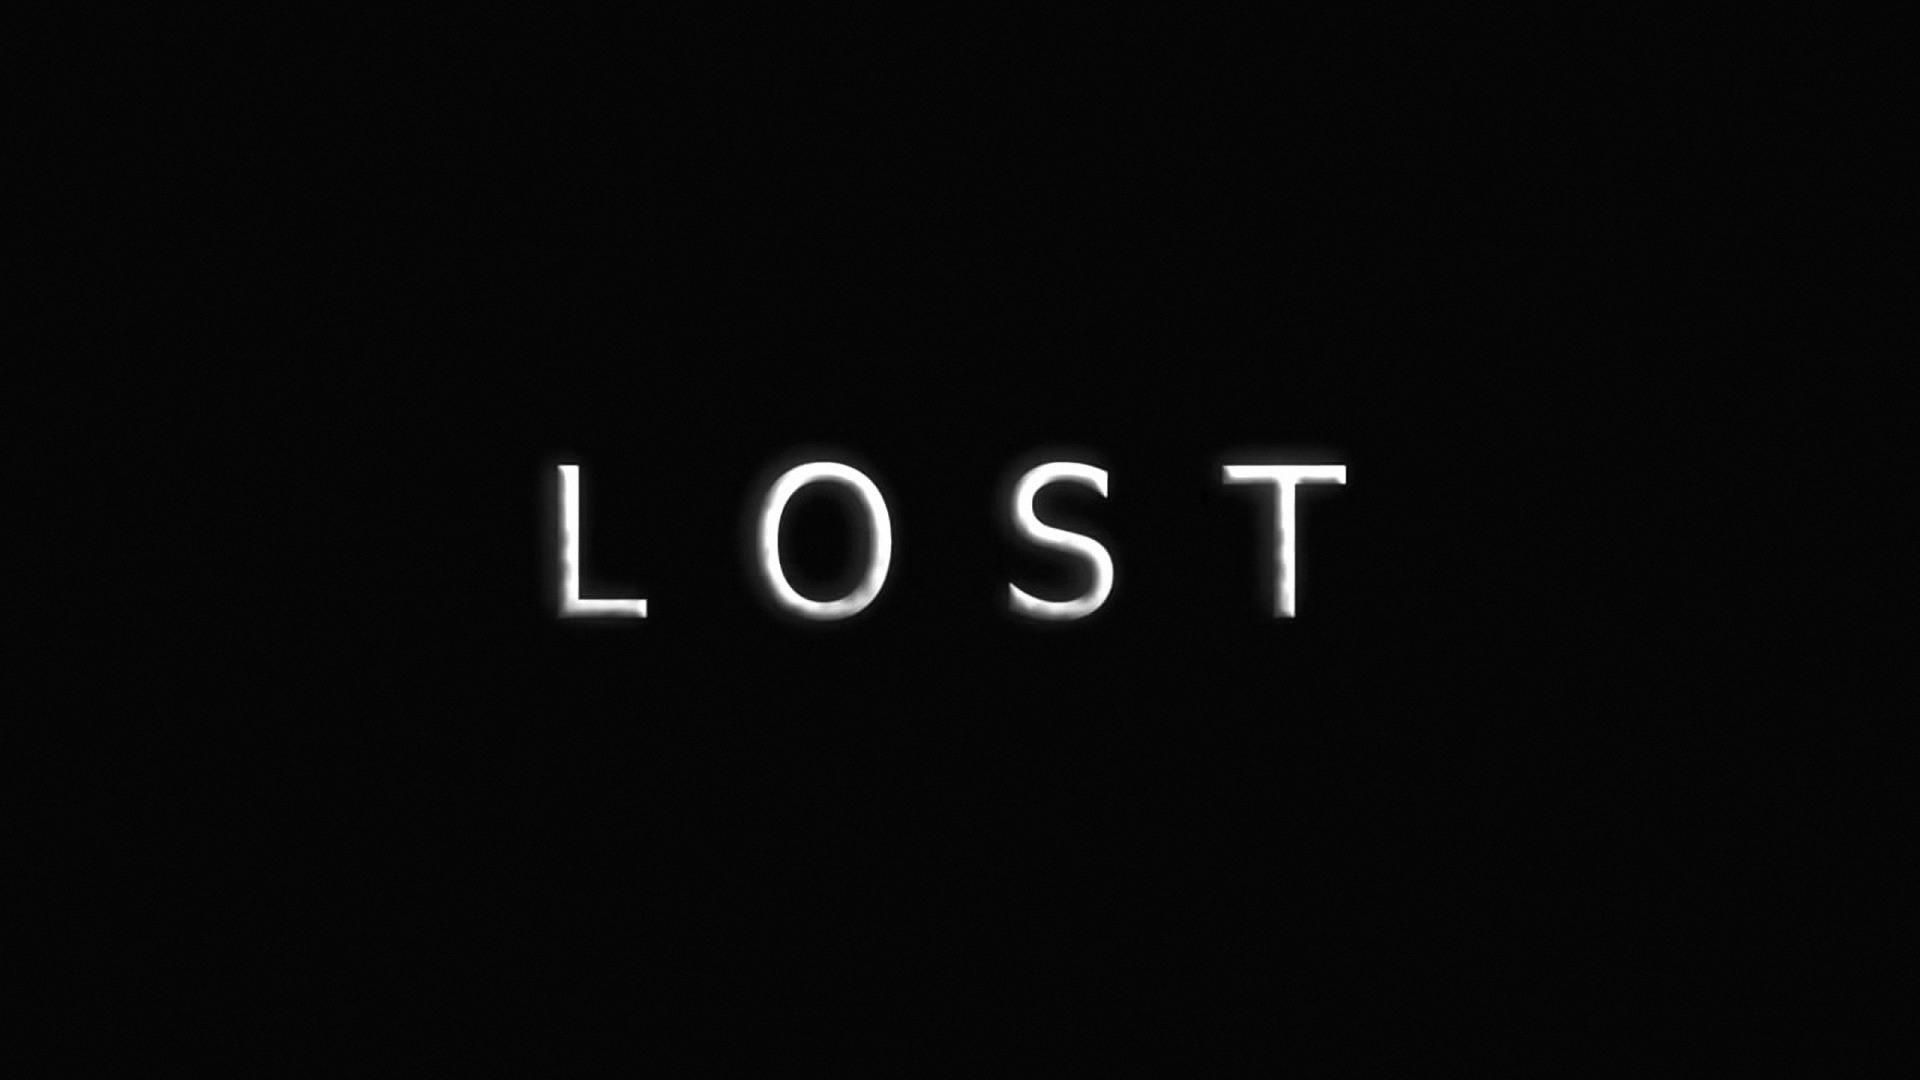 lost 1920x1080 Wallpapers, 1920x1080 Wallpapers & Pictures Free ...